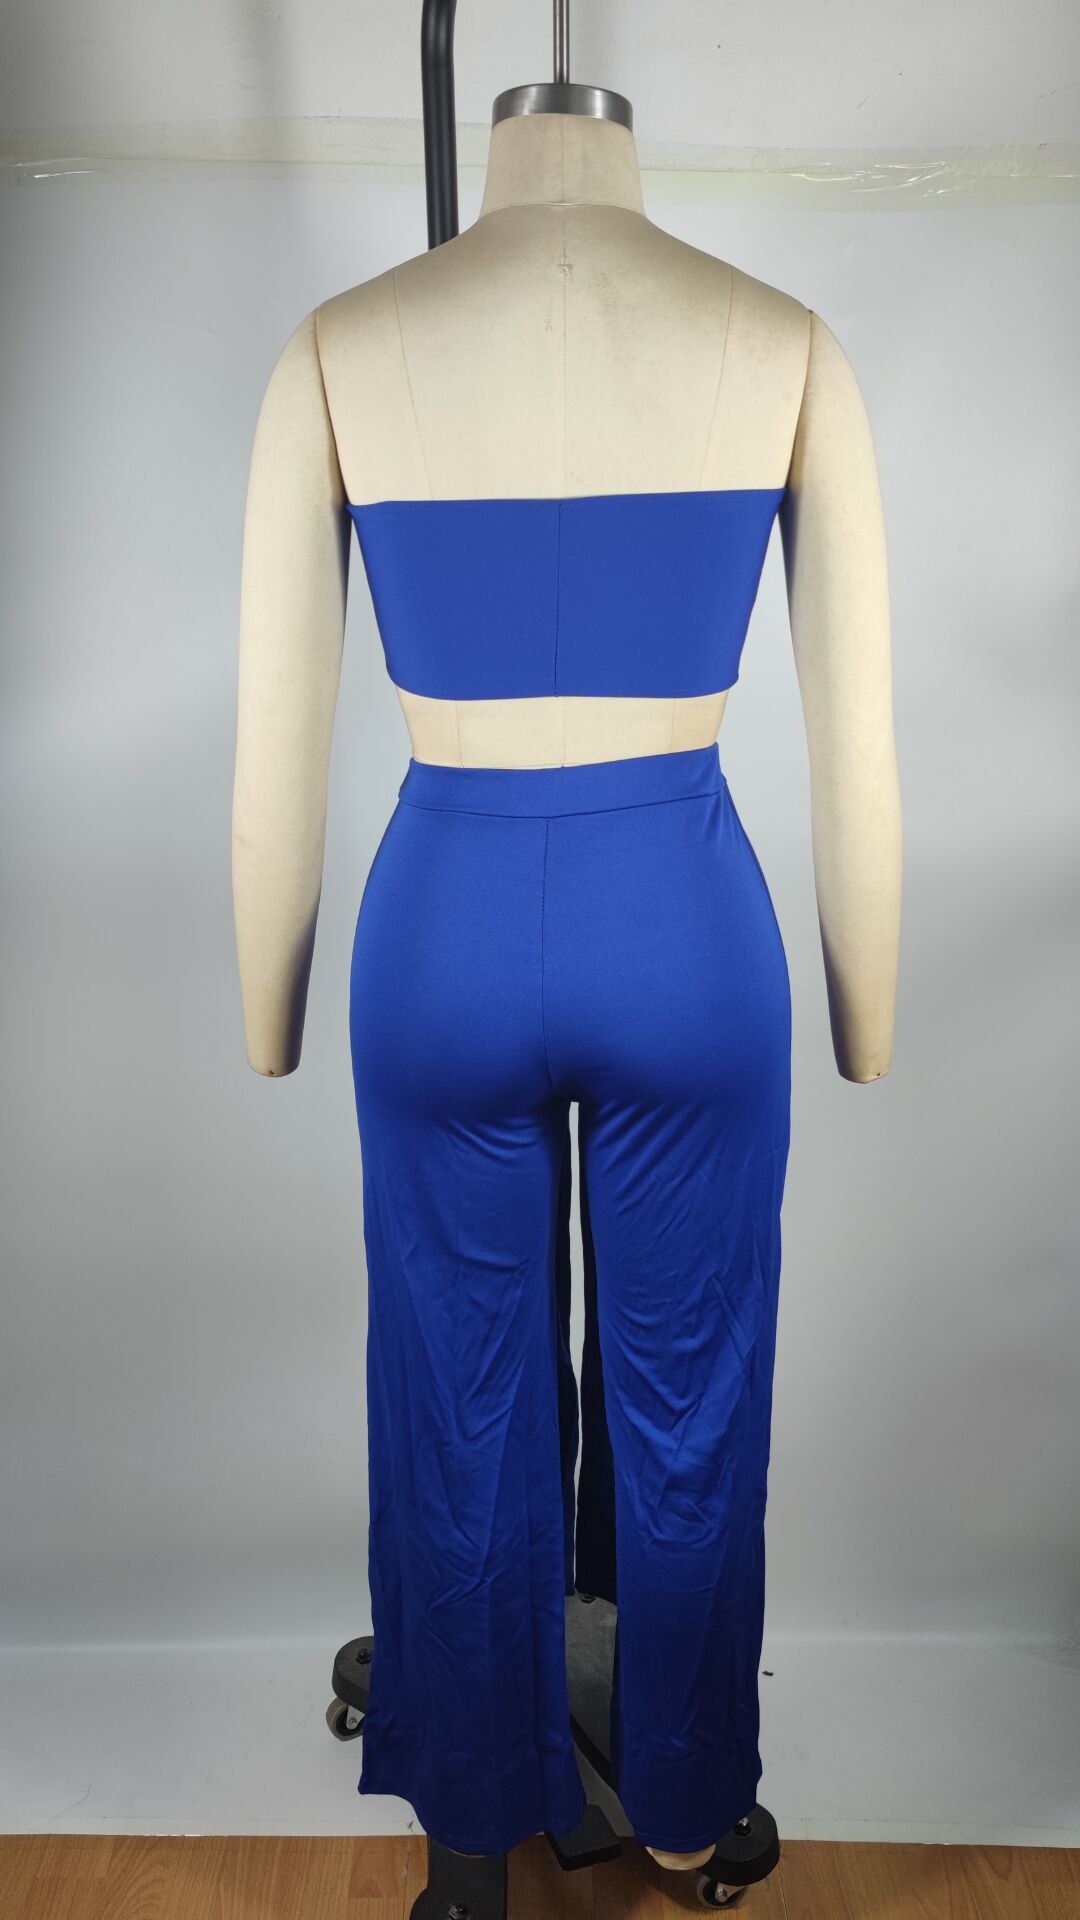 Ladies Trousers, Ladies Royal Blue High Waist Trousers Double